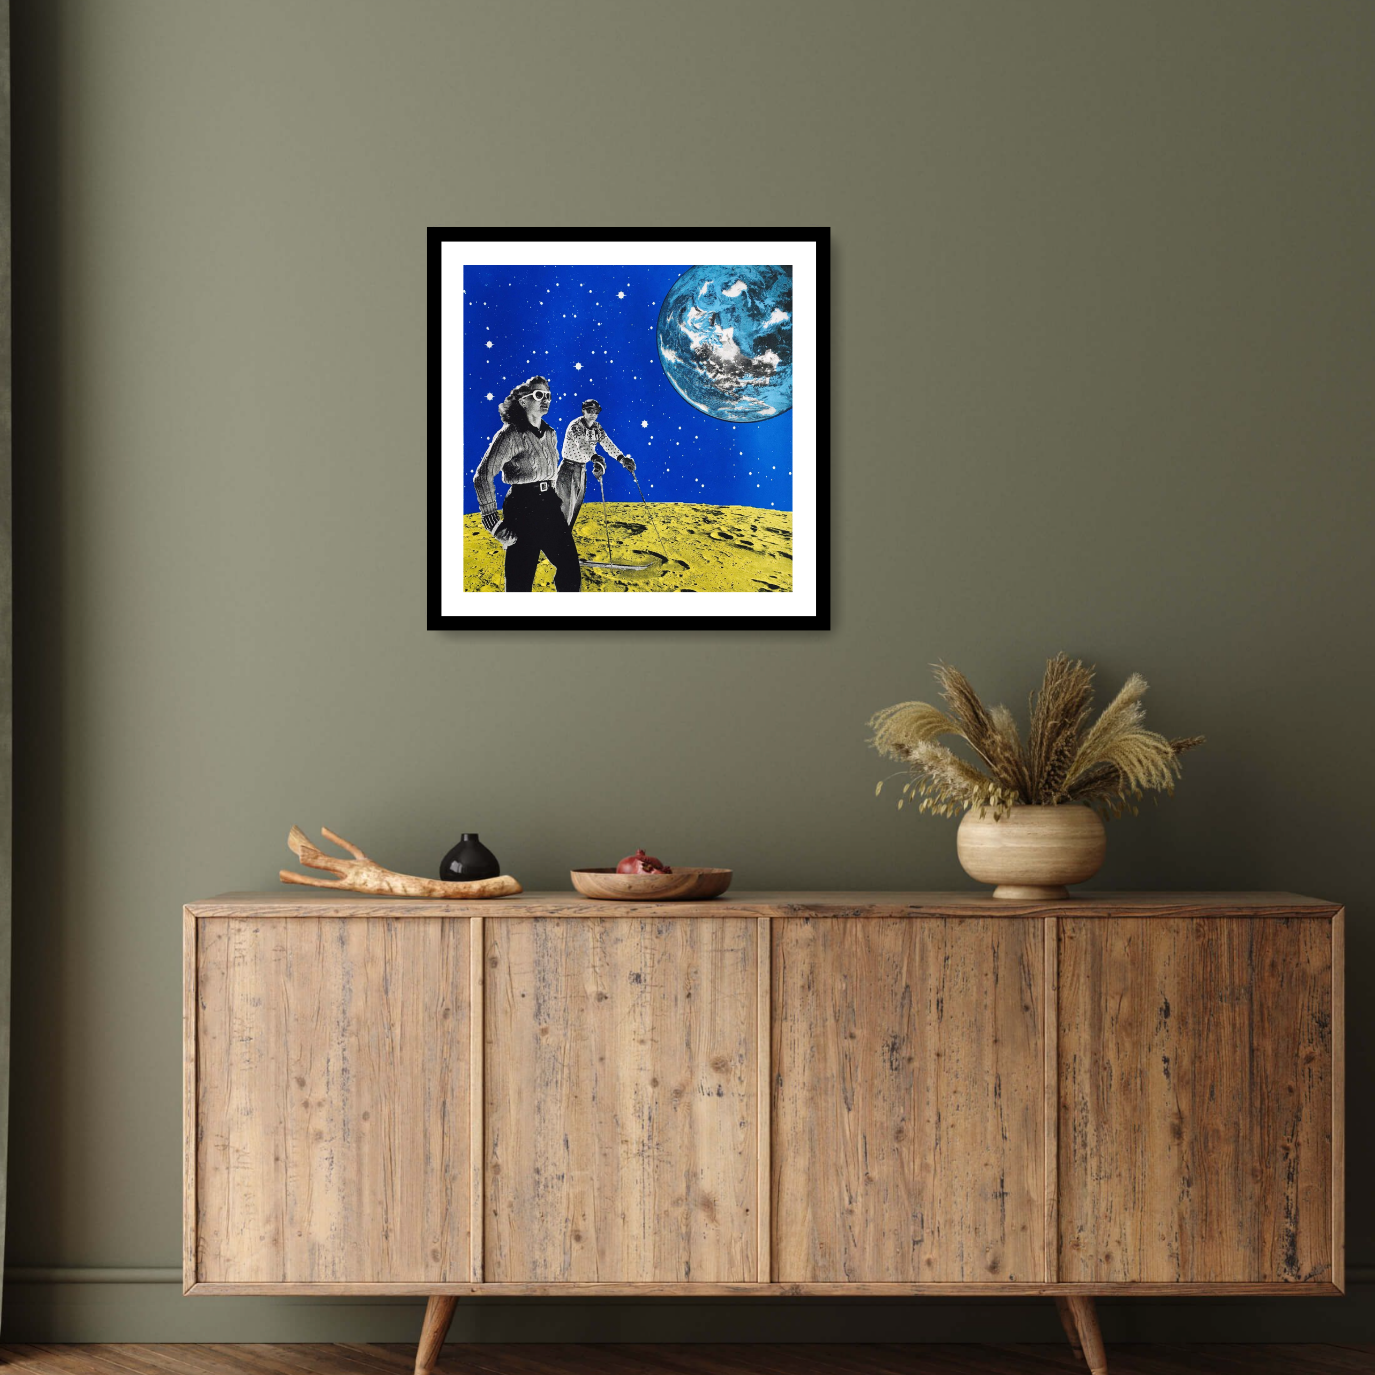 Image of the black framed print ‘Hiking space' by Anne Storno, depicting a man and a woman in chic outfits ski upon the surface of a vibrant yellow moon; A light blue and white coloured Earth floats in the background, against a sky full of sparkling stars